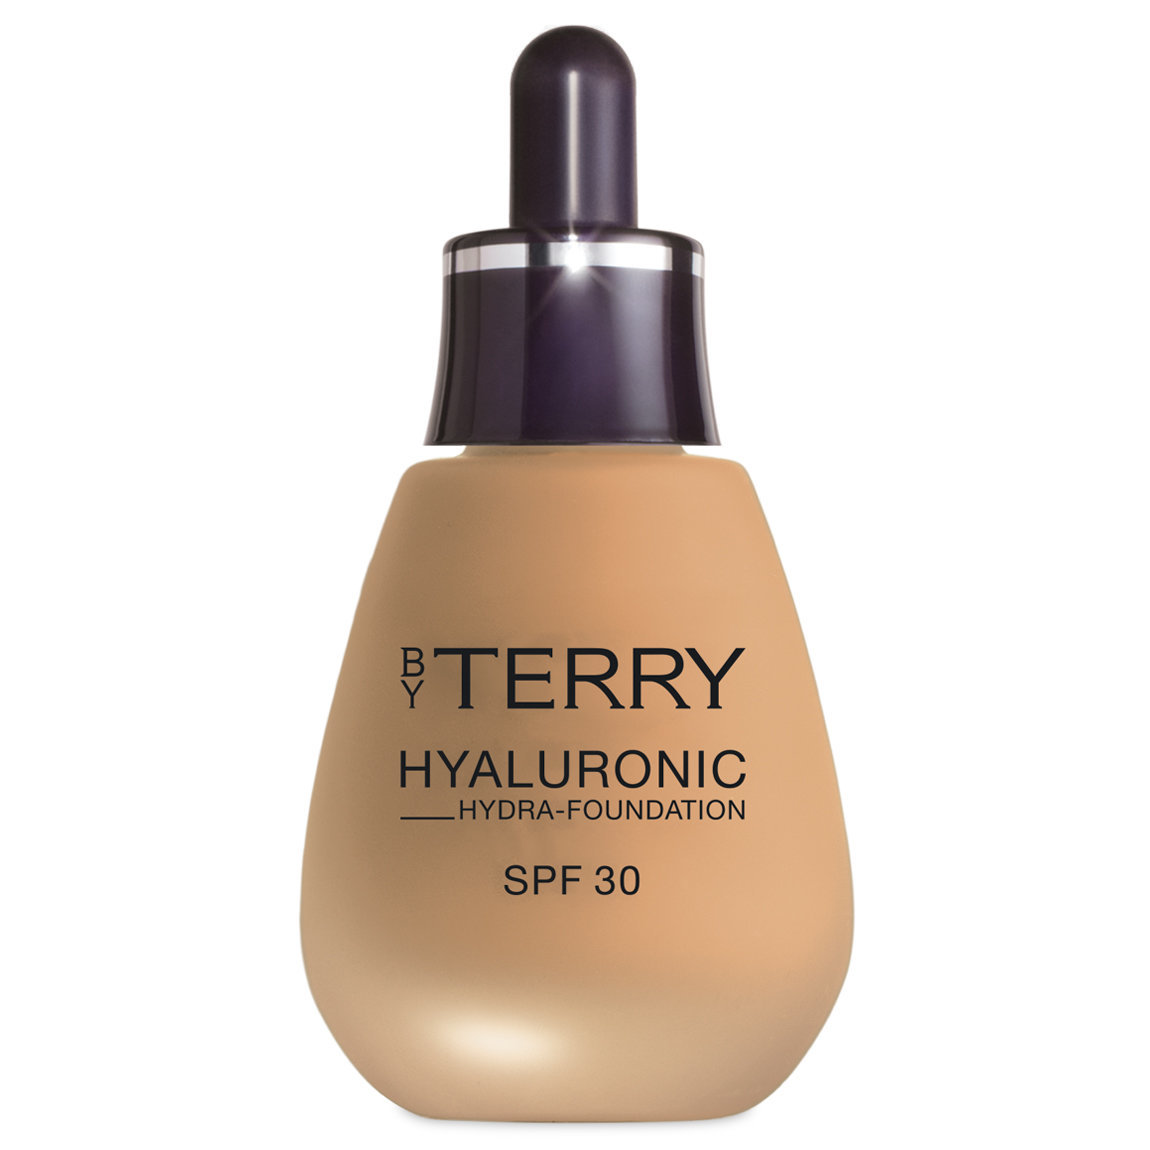 terry hyaluronic hydra